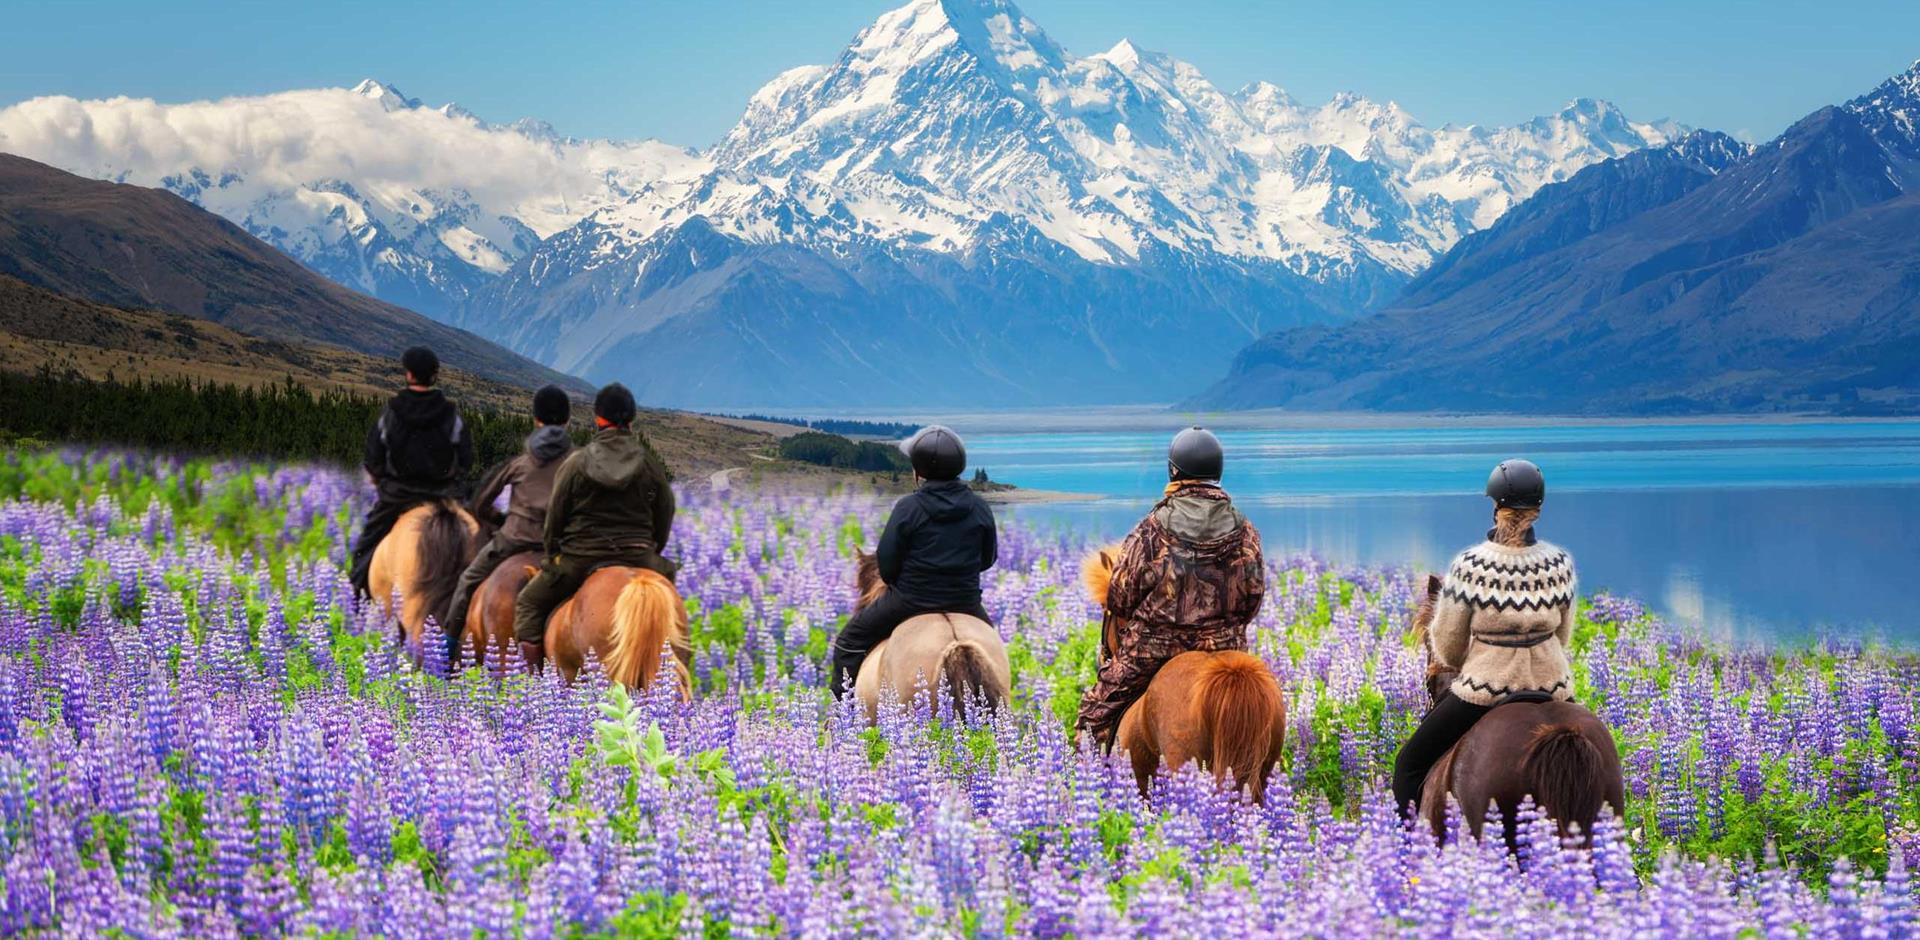 Horse riders in a lupine flower field, Mount Cook National Park, New Zealand.